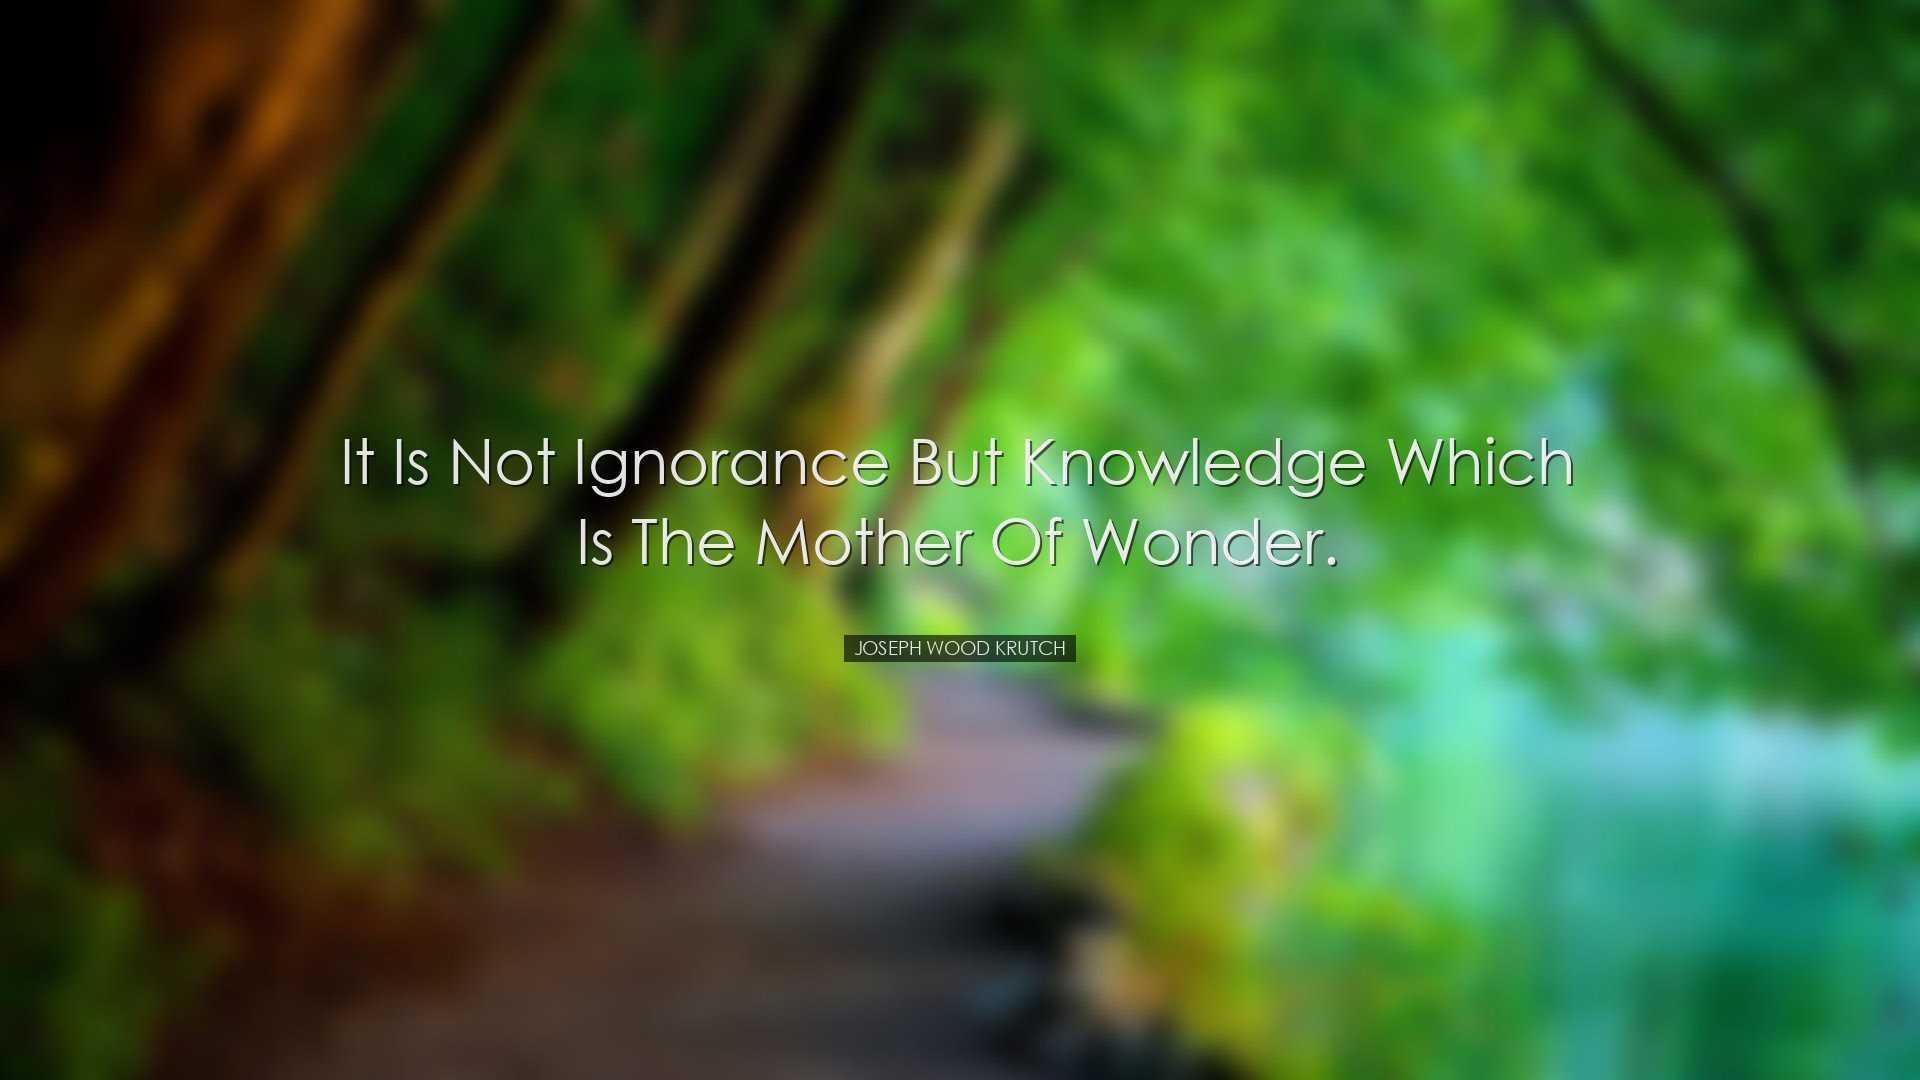 It is not ignorance but knowledge which is the mother of wonder. -